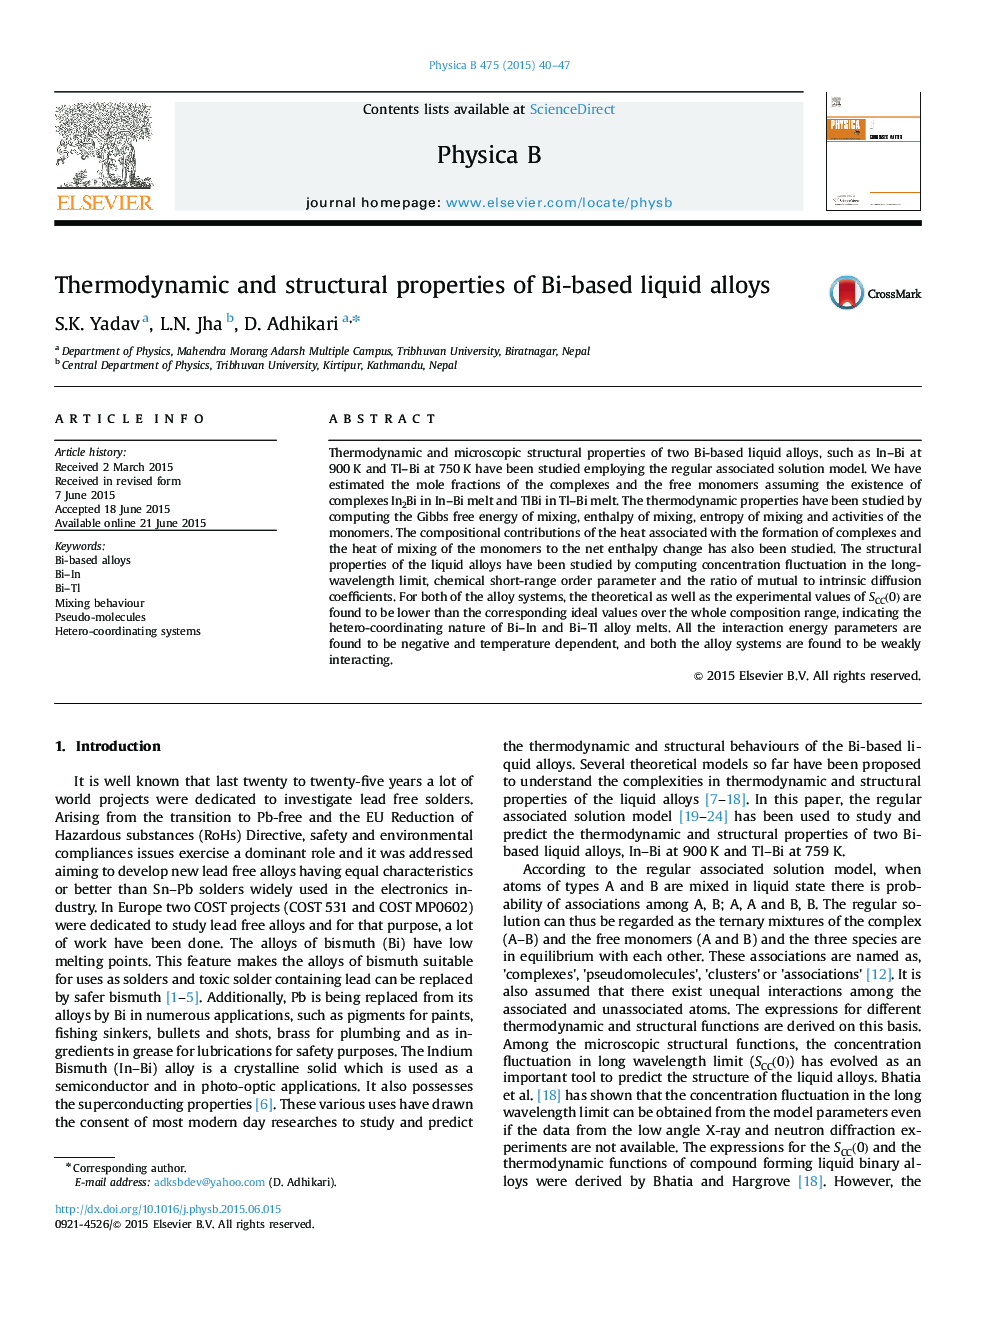 Thermodynamic and structural properties of Bi-based liquid alloys